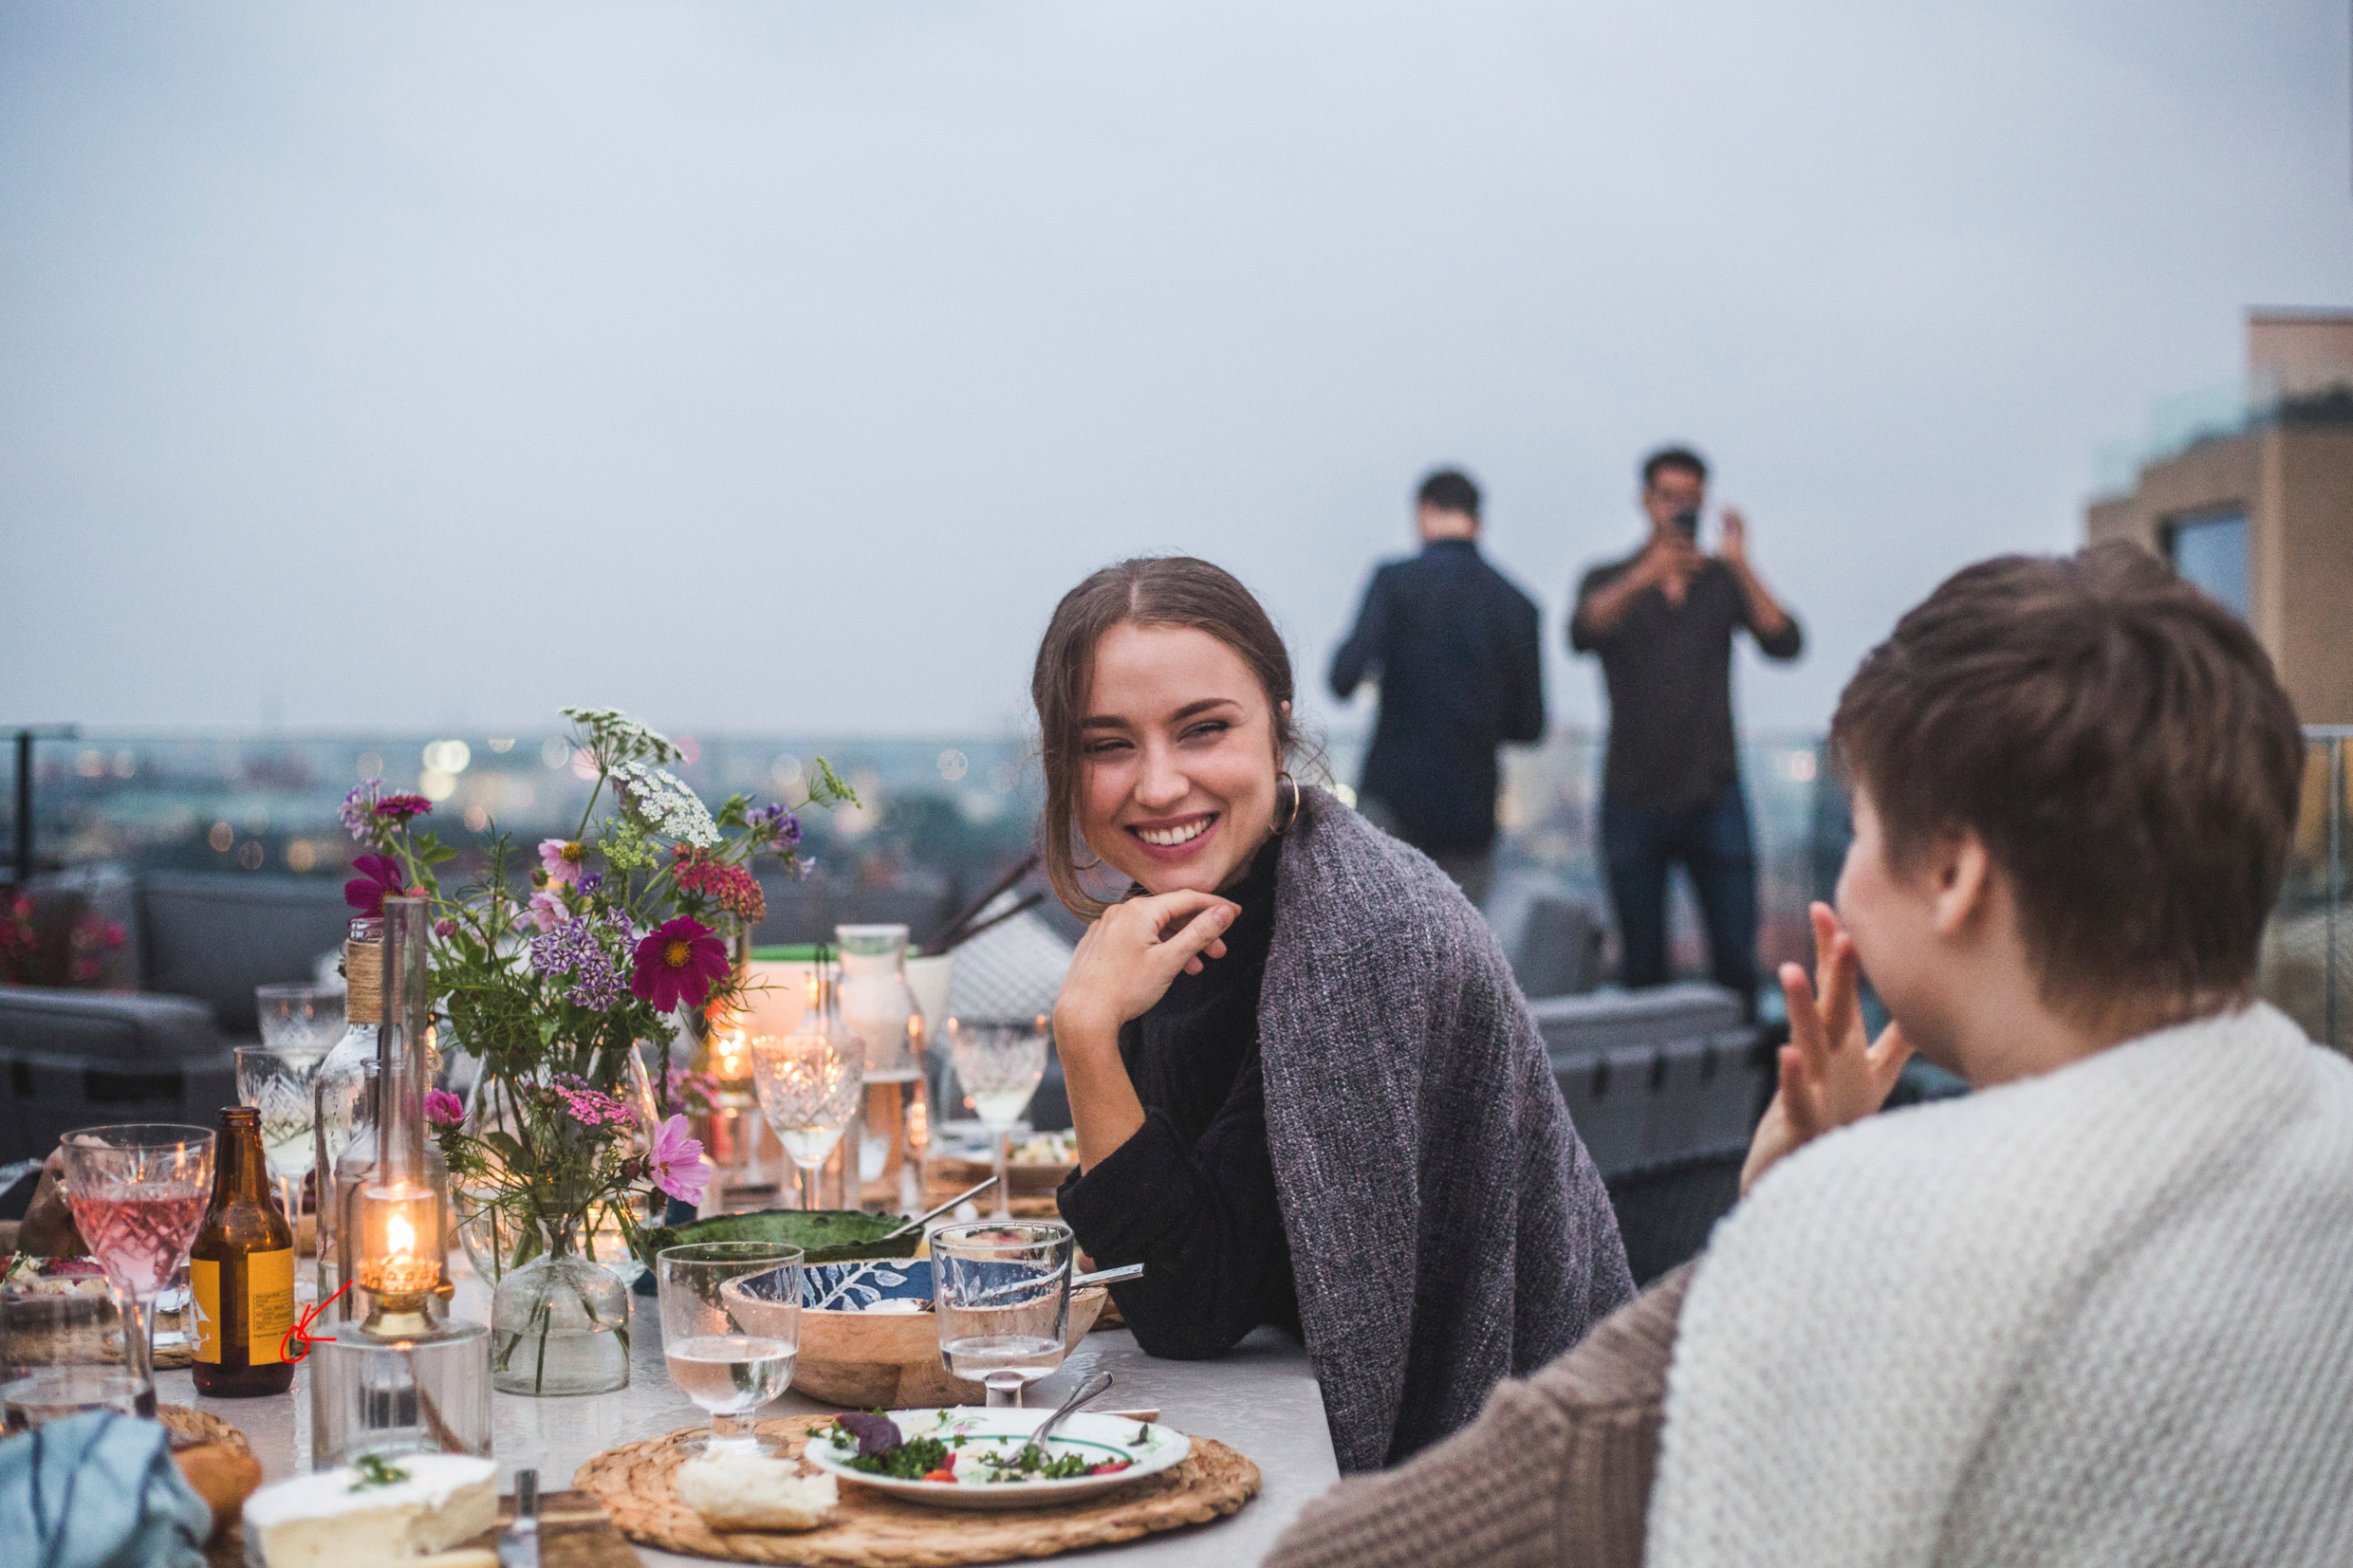 Friends eating dinner on a roof terrace in a Swedish city.